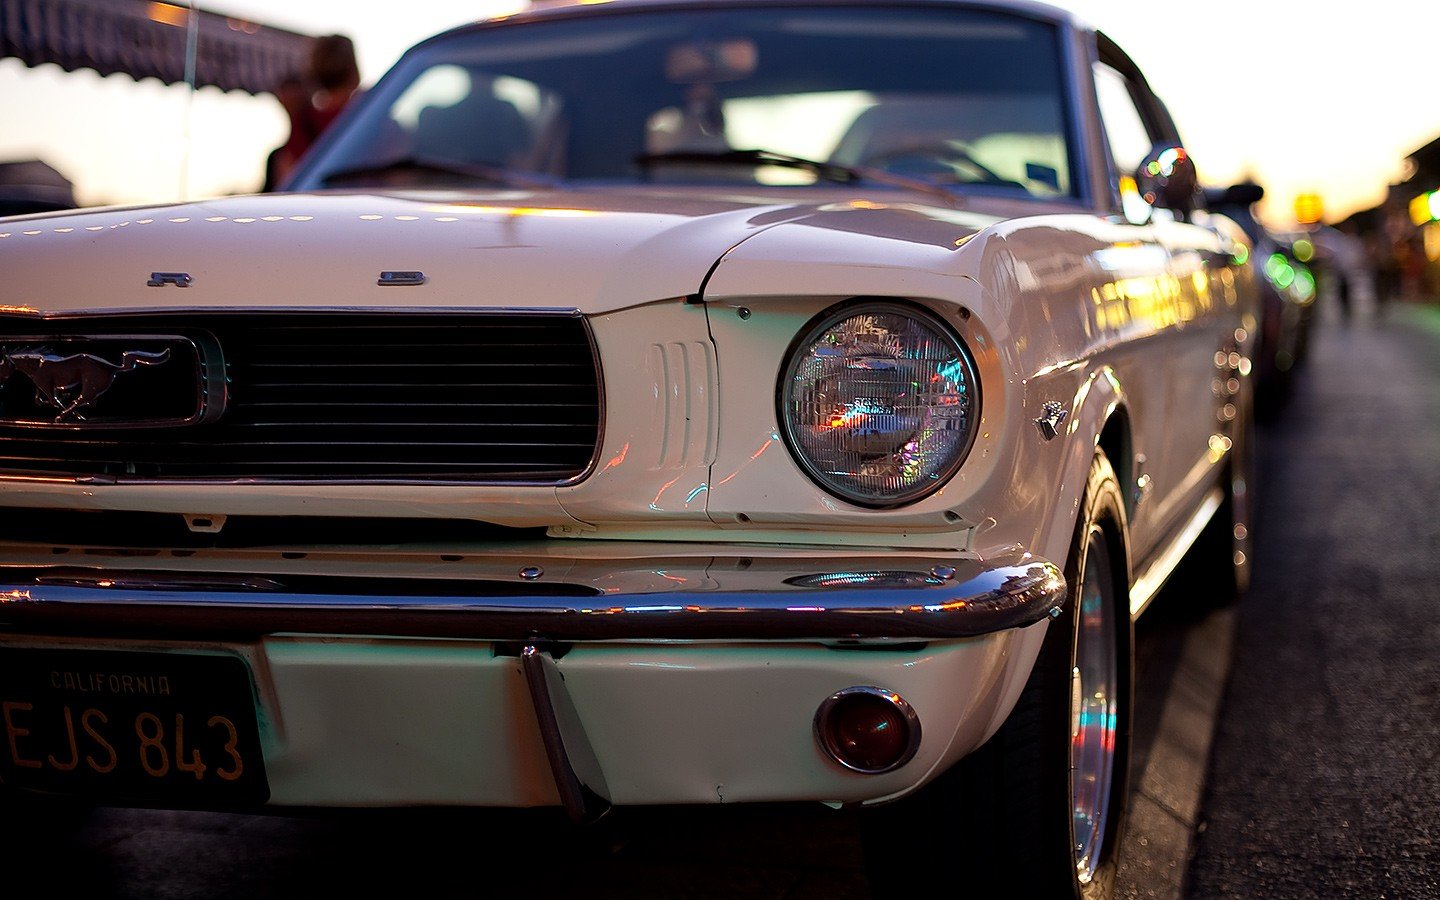 cars, Ford, Vehicles, Ford, Mustang Wallpaper